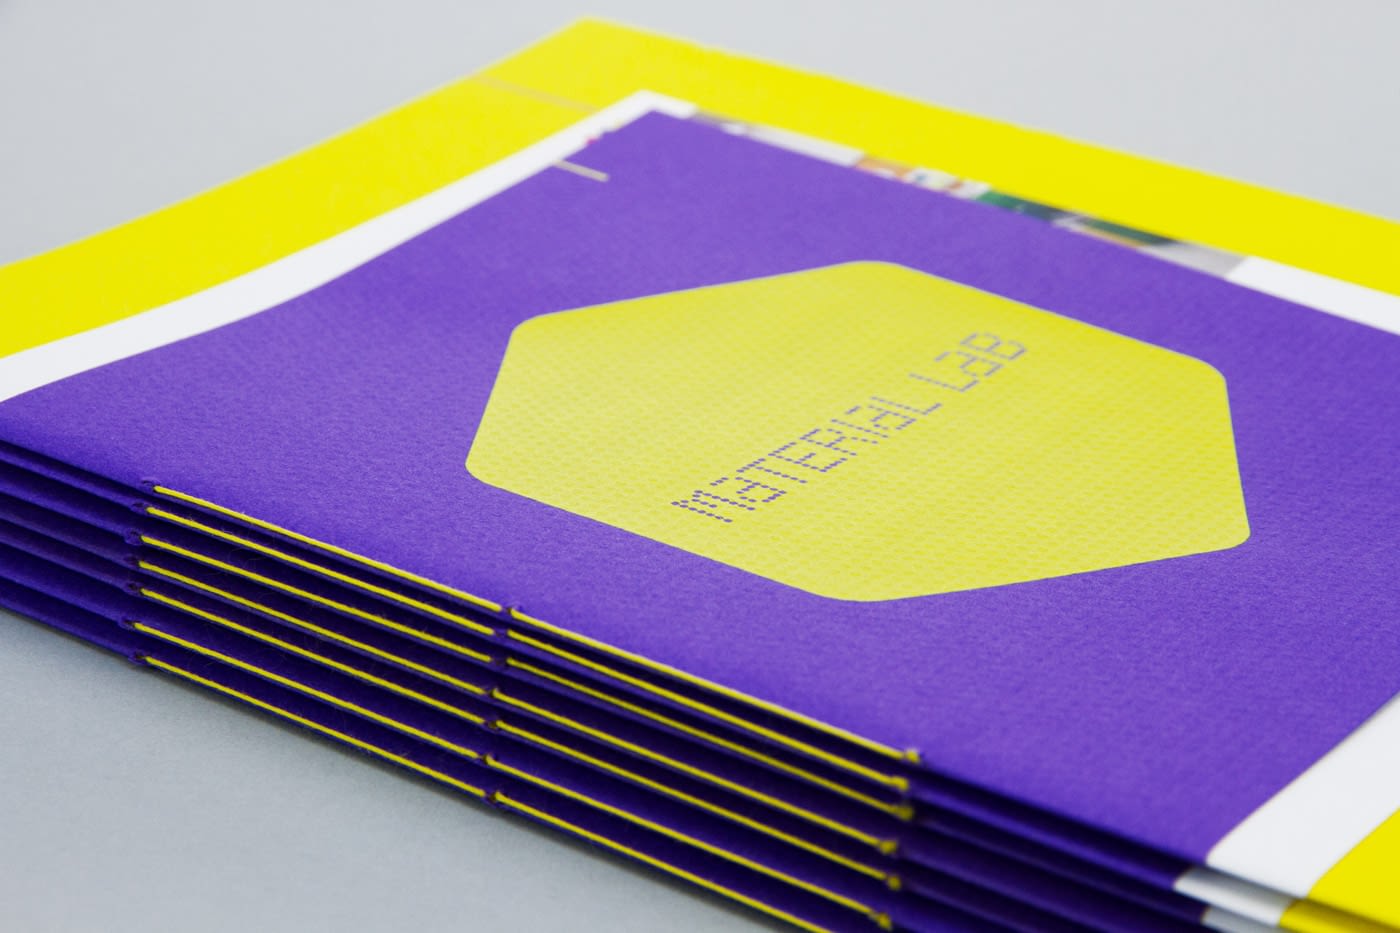 A stack of 7 Material Lab 20 page booklets. The cover stock is Colorplan Matrix emboss, in purple. On the cover is a large yellow screen printed hexagon with the Material Lab logo inverted in the centre. The sides of the booklet are visible and are saddle stitched with yellow thread.